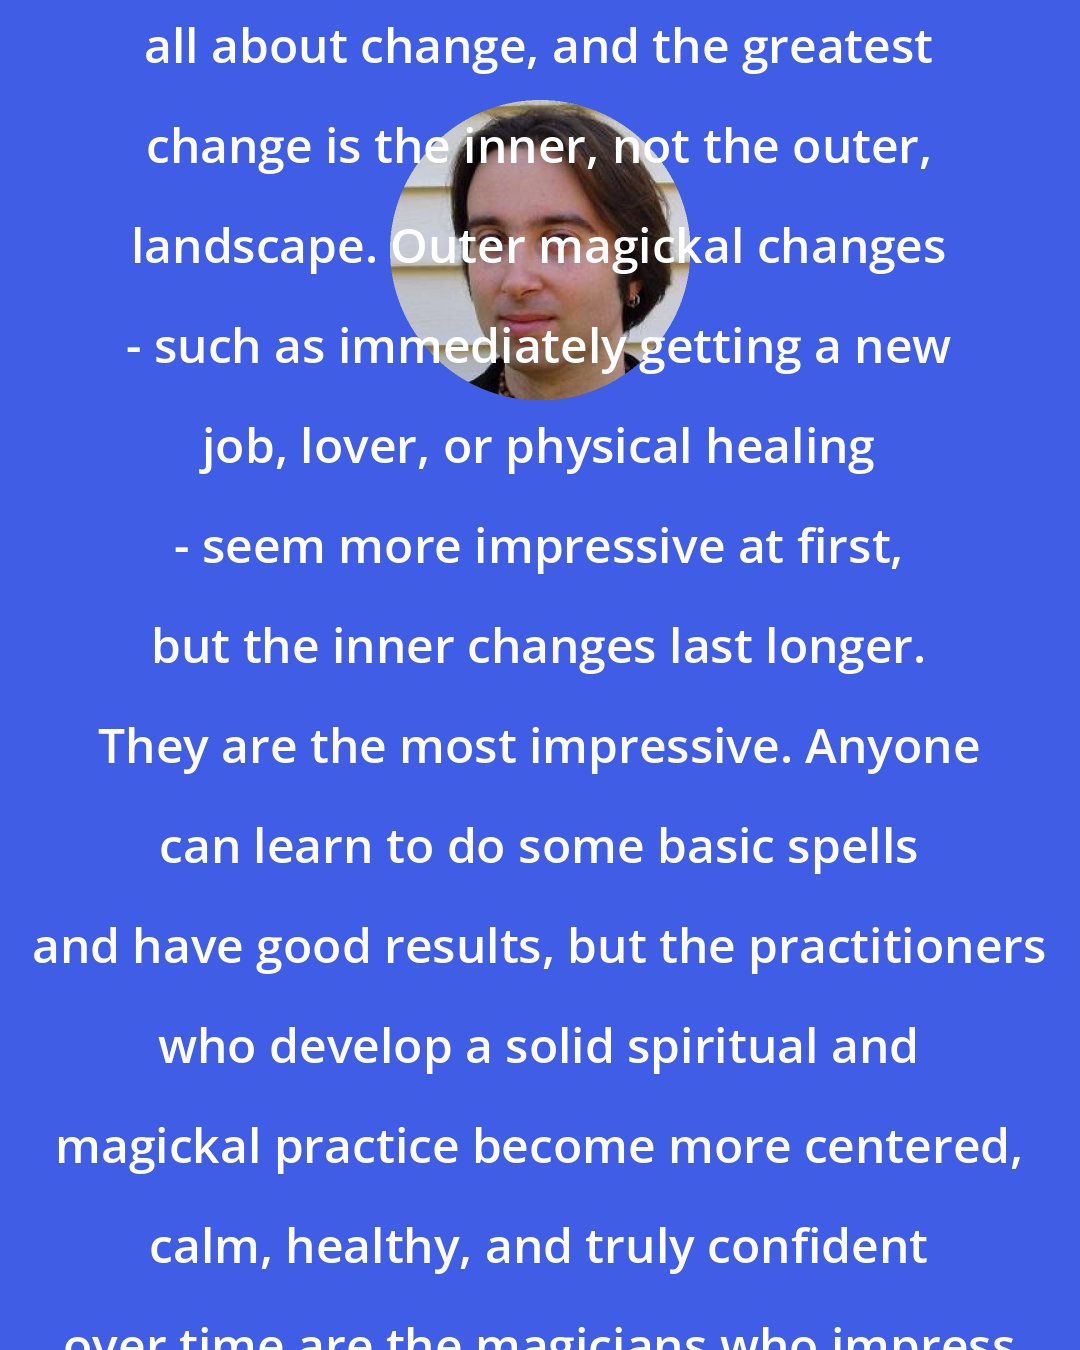 Christopher Penczak: Many people forget that magick is all about change, and the greatest change is the inner, not the outer, landscape. Outer magickal changes - such as immediately getting a new job, lover, or physical healing - seem more impressive at first, but the inner changes last longer. They are the most impressive. Anyone can learn to do some basic spells and have good results, but the practitioners who develop a solid spiritual and magickal practice become more centered, calm, healthy, and truly confident over time are the magicians who impress me.